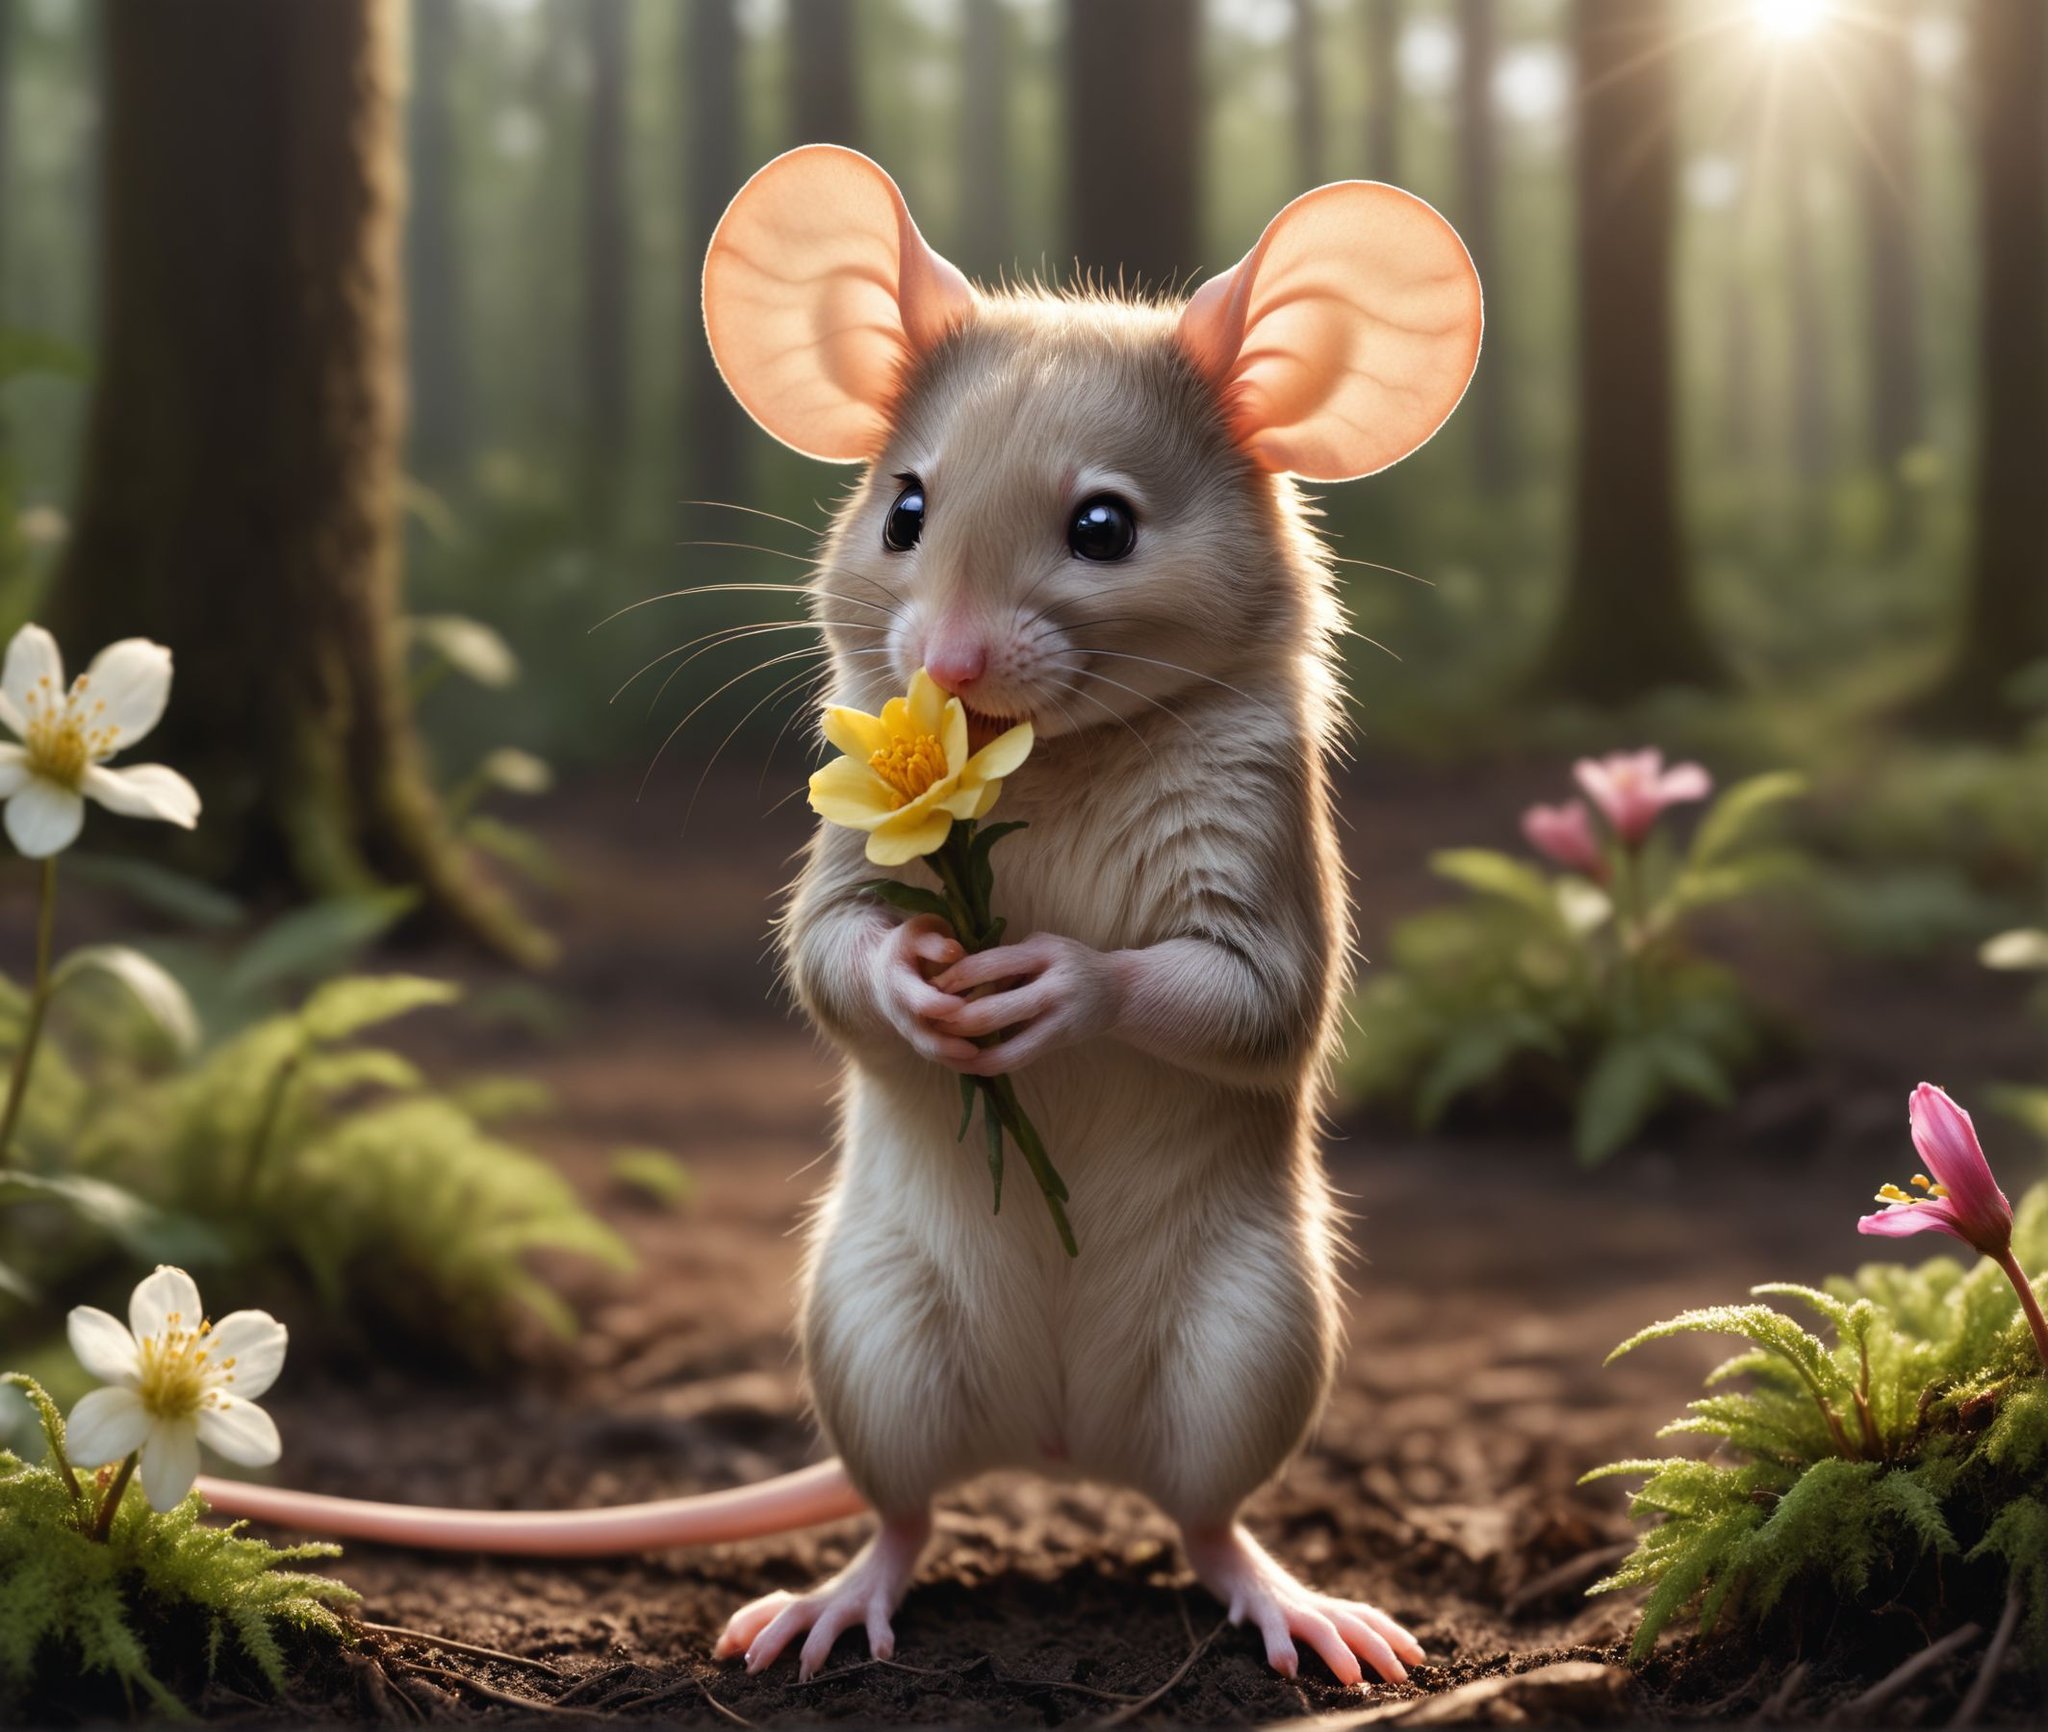 nature shot photo  a mouse is holding a flower, forrest ground, natural light <lora:Furry Enhancer 6.1:0.8>